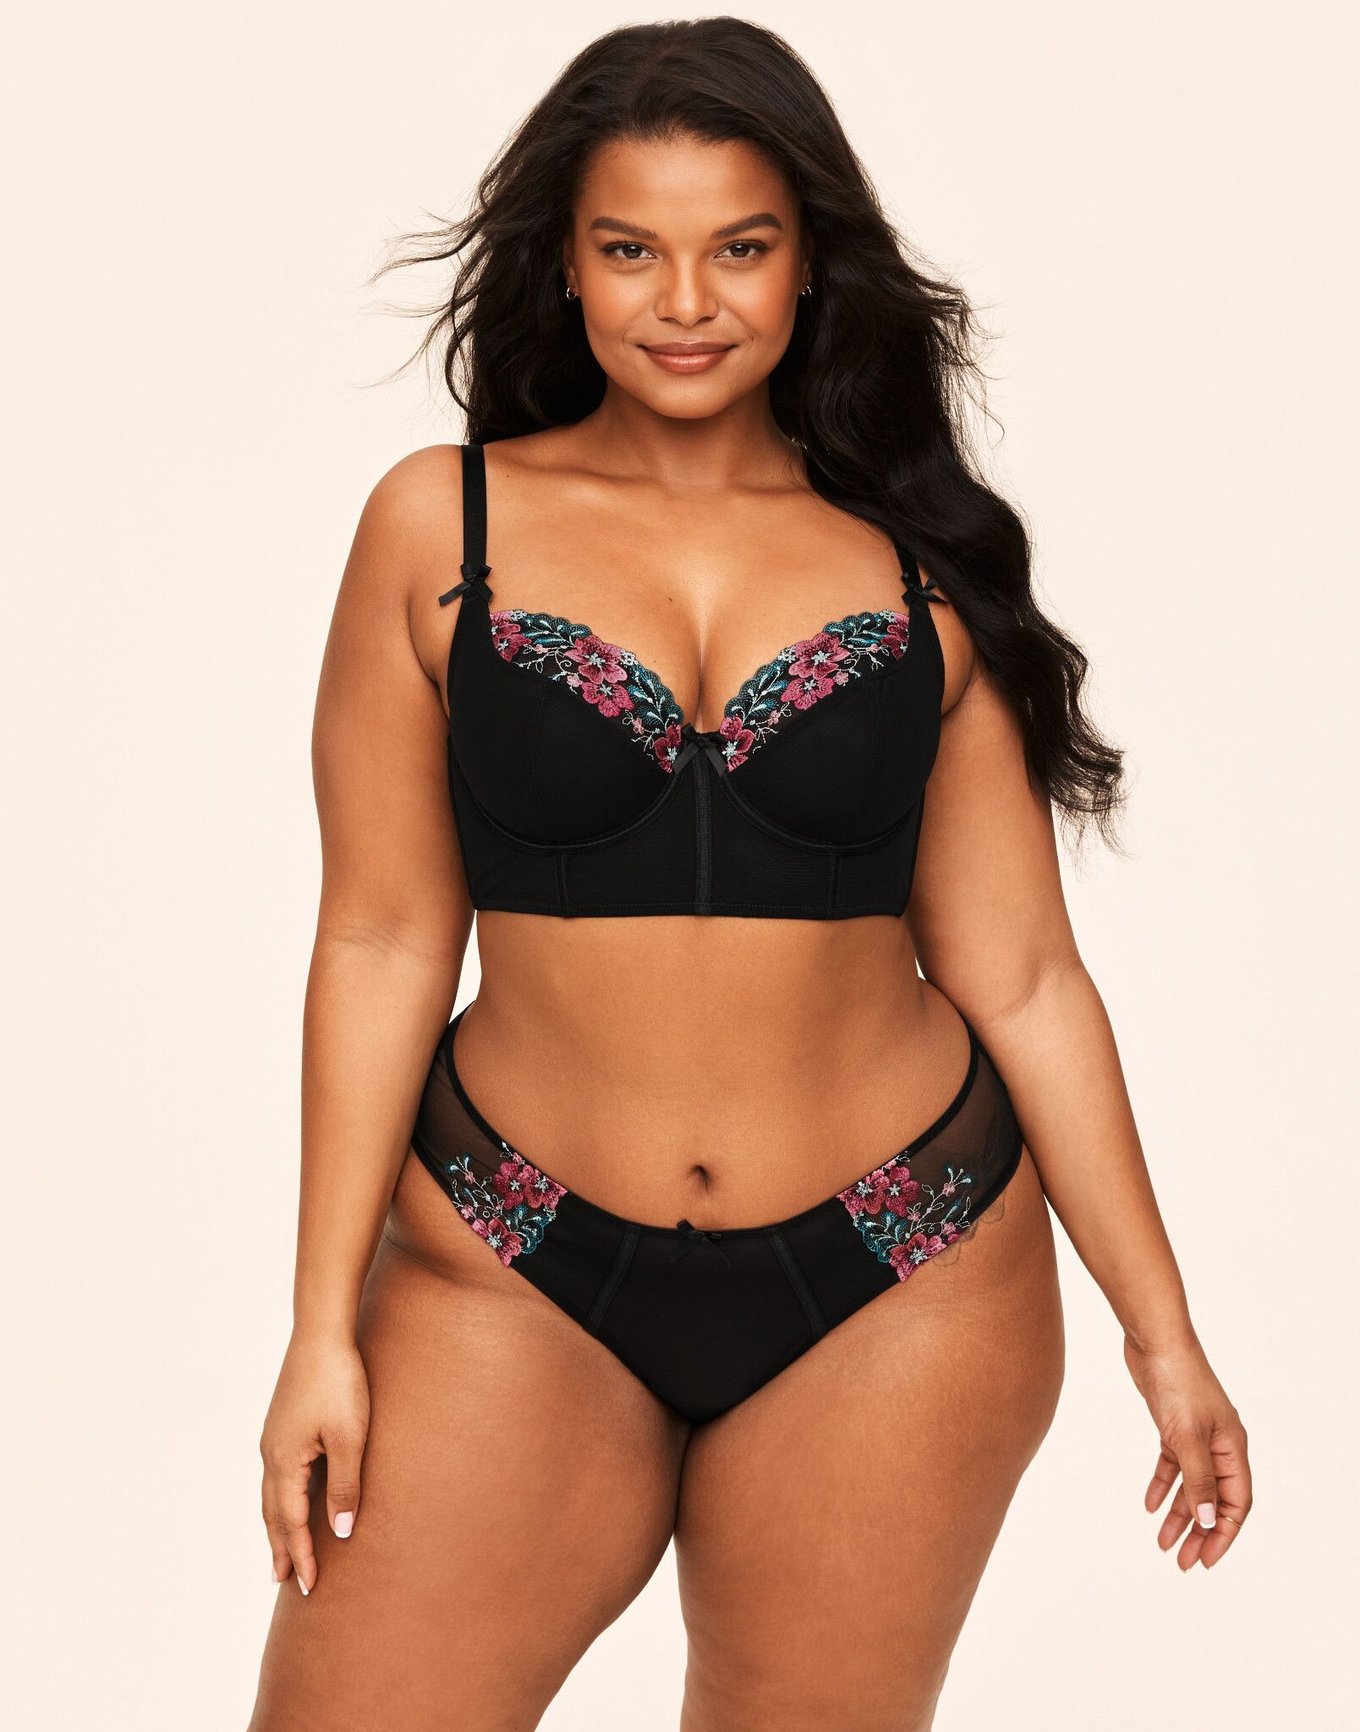 Adore me (plus size only) – ELEVEN 22 ONLINE